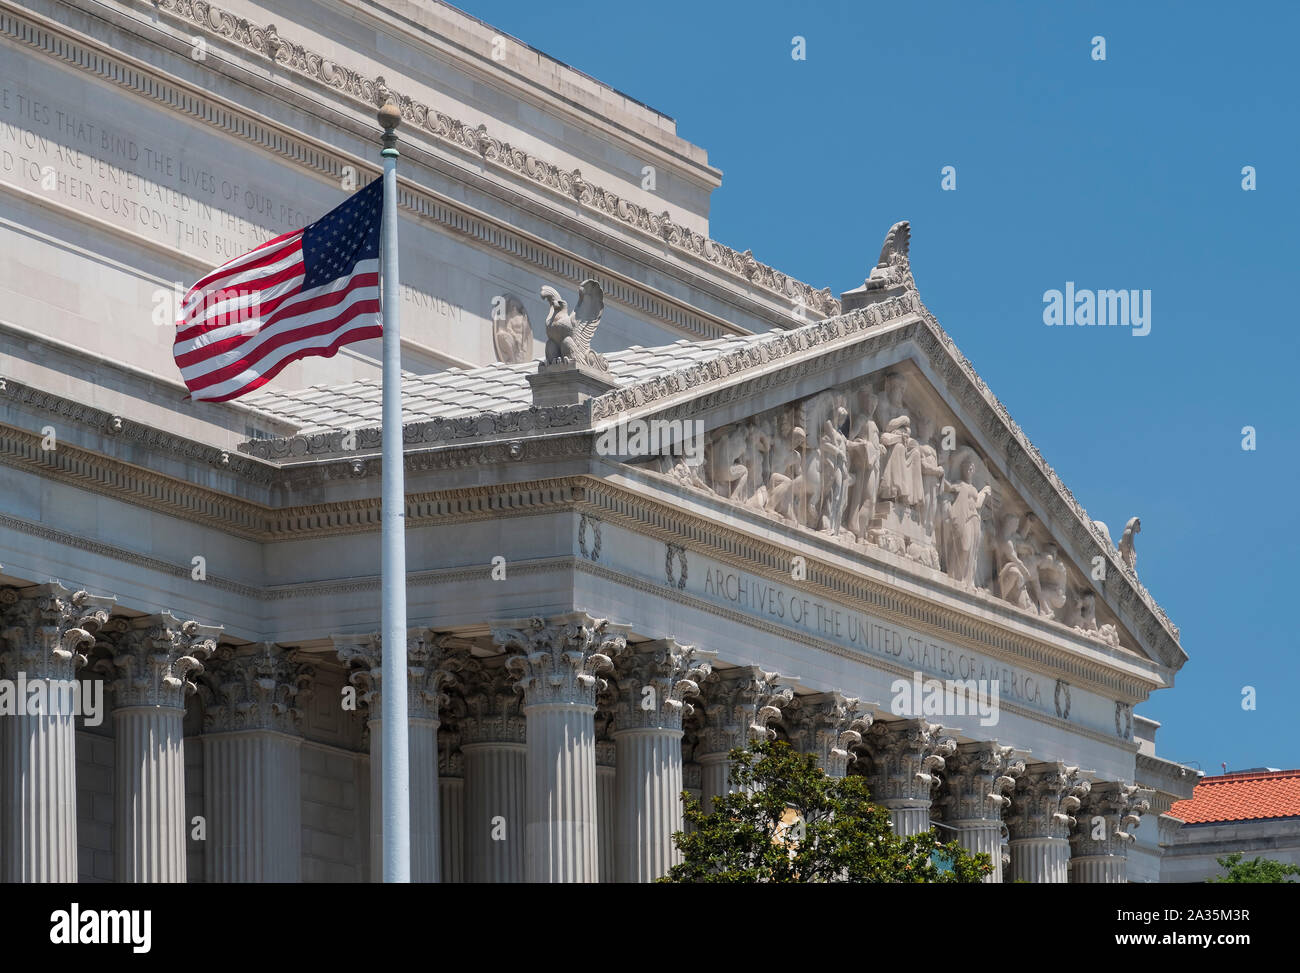 National Archives of the United States of America Building, Pennsylvania Avenue, Washington D.C. Stock Photo